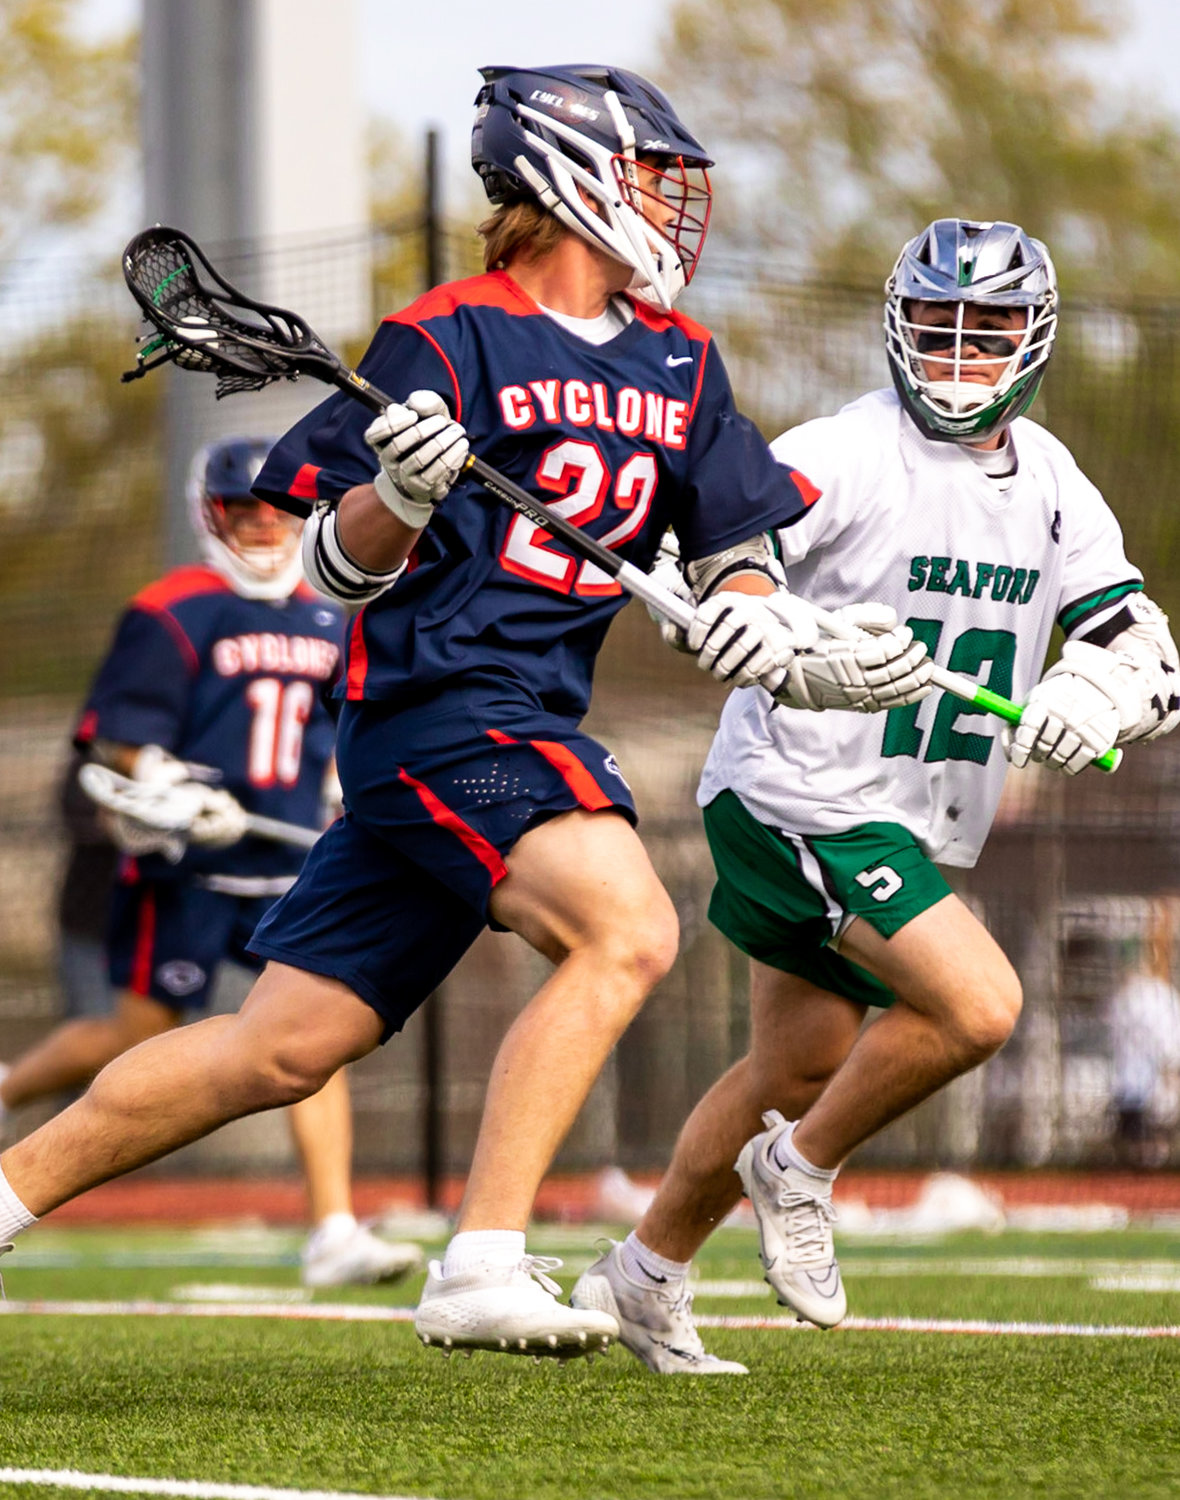 Despite a hat trick and an assist from senior Brady West, the Cyclones dropped an intense 7-5 matchup at Seaford on May 10.